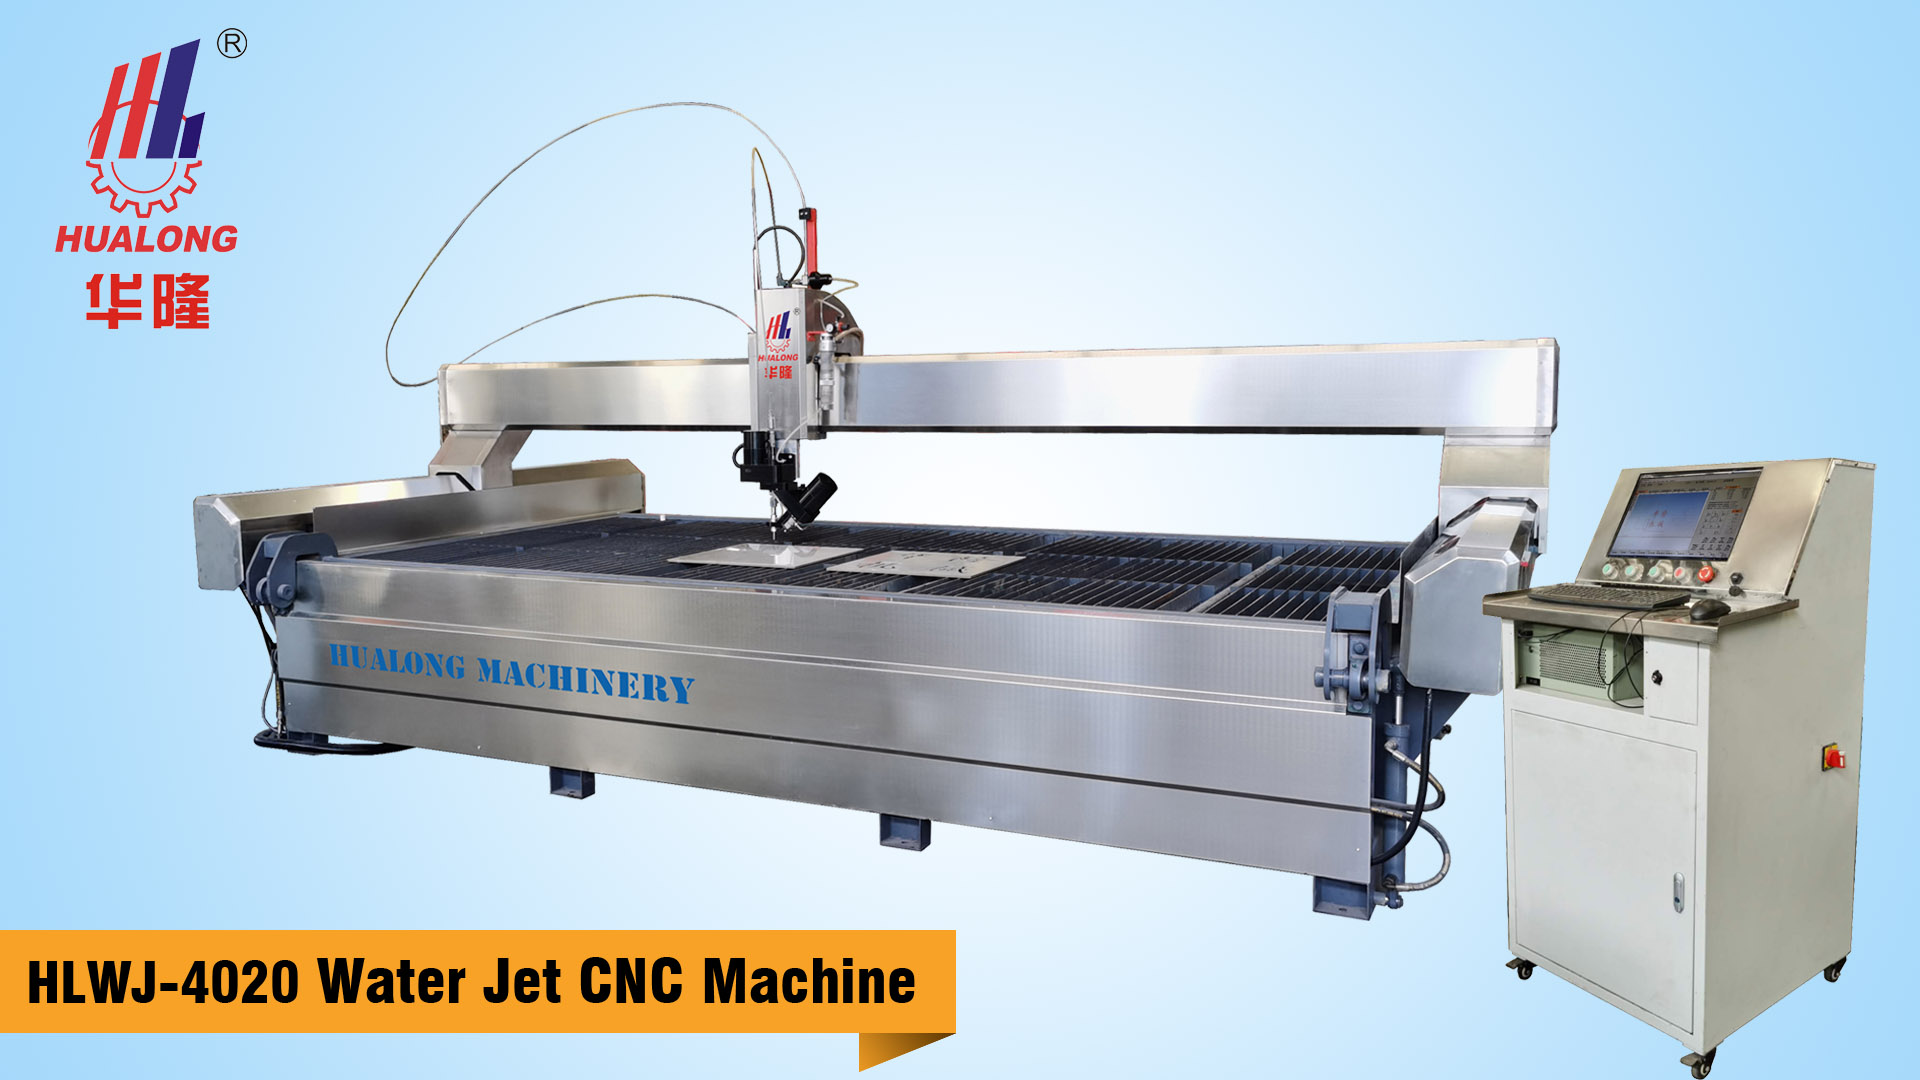 What is CNC water jet cutting machine?